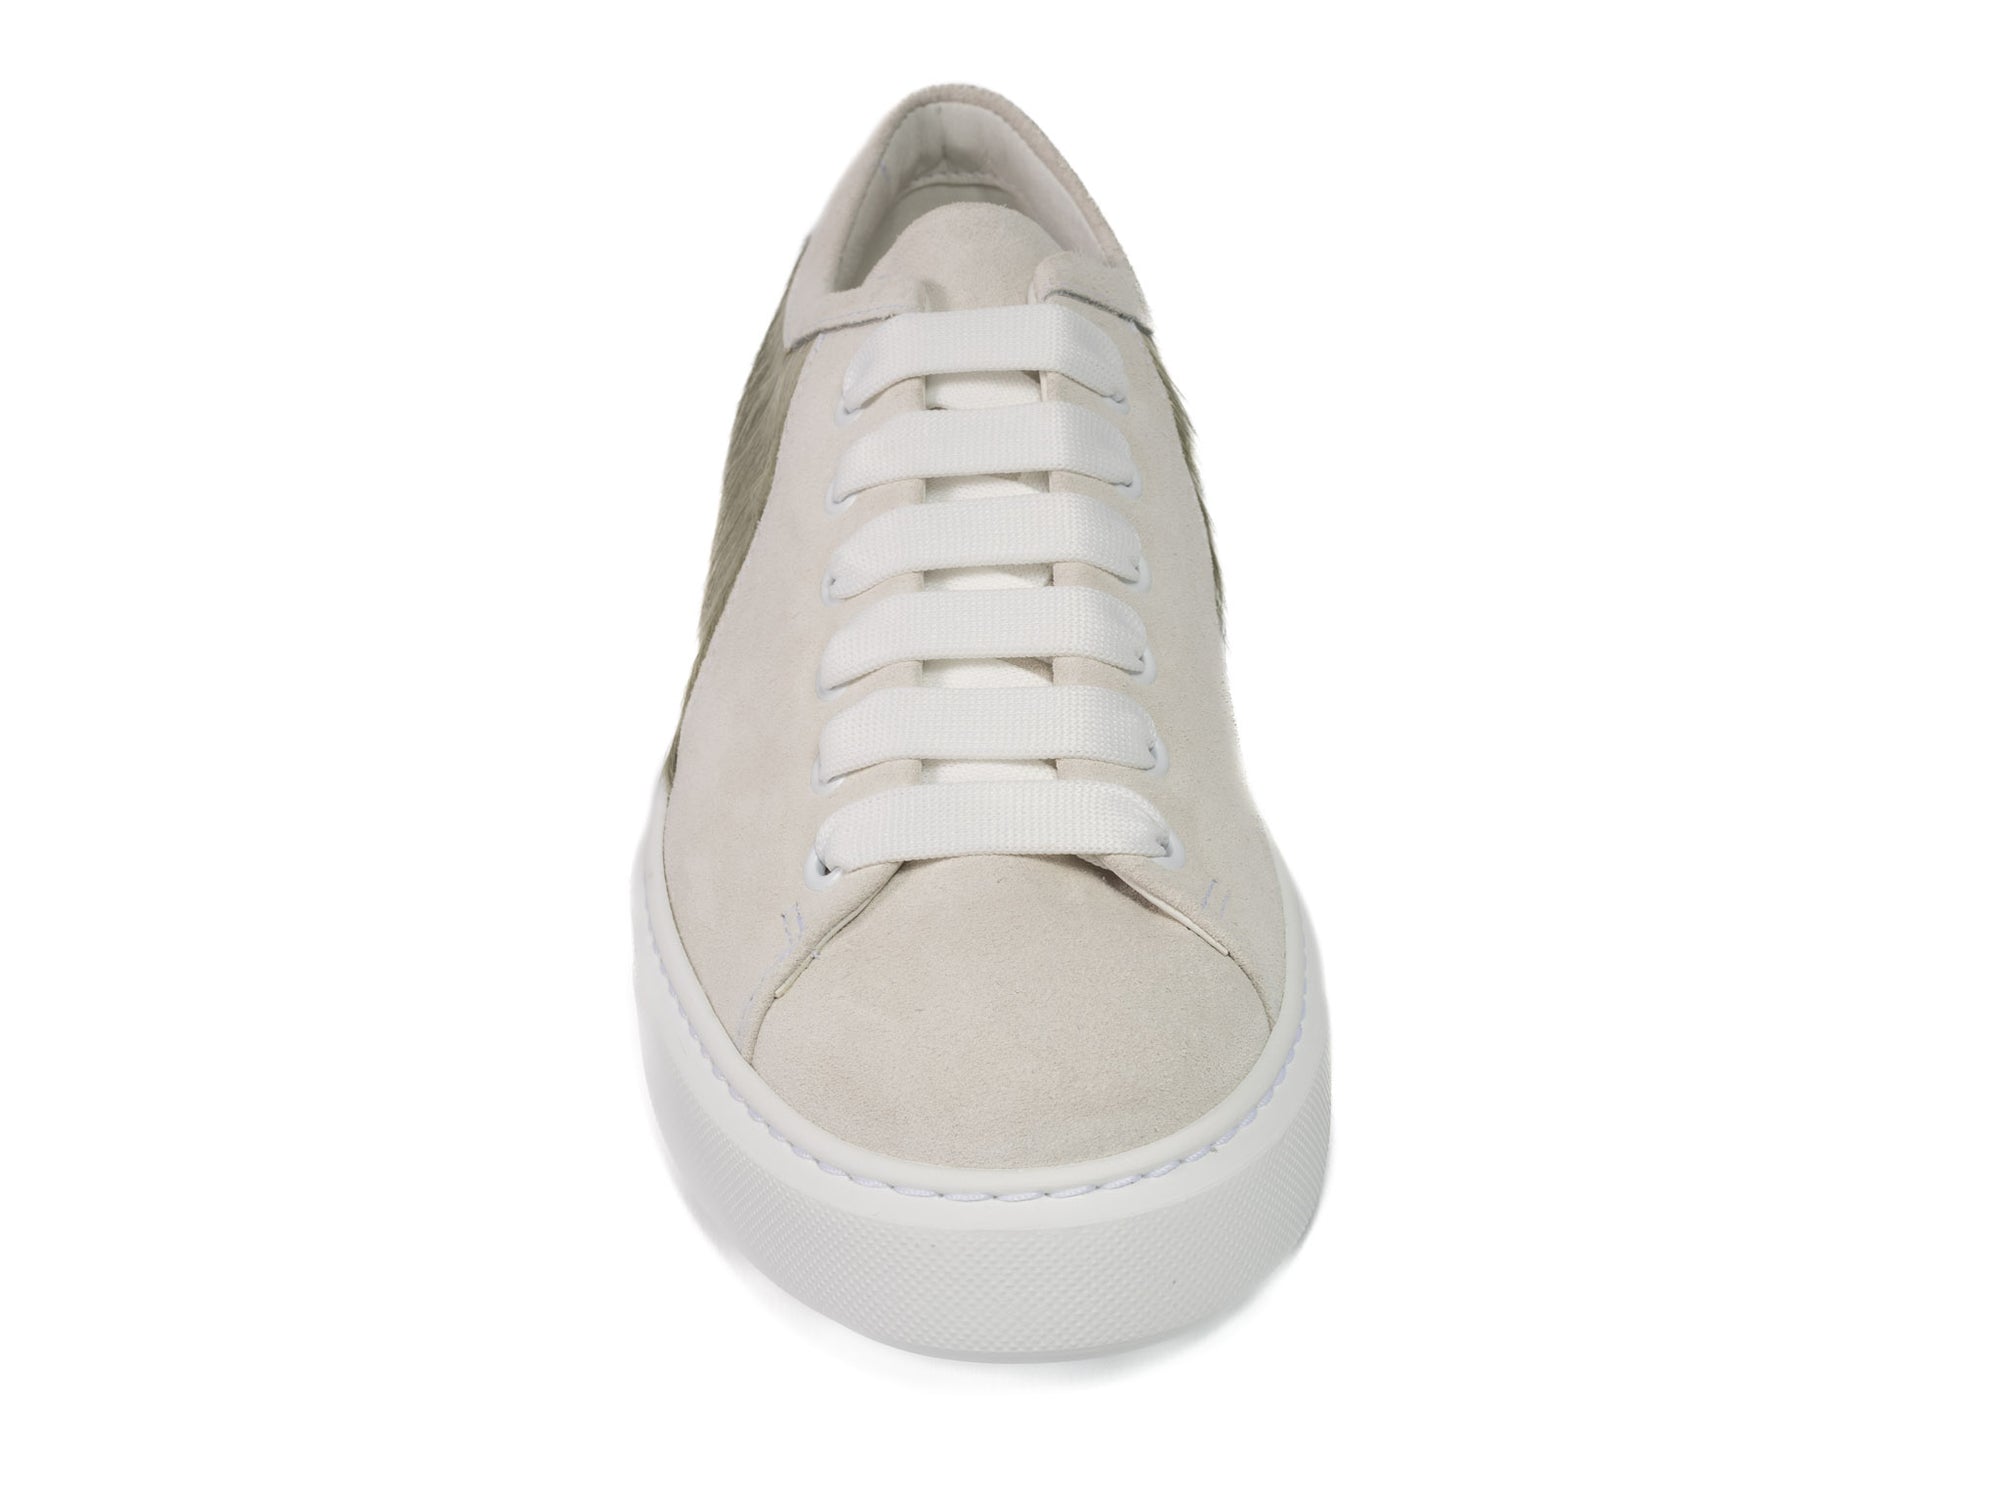 Earth Hair-on-hide Trainer Model 001 in White Suede